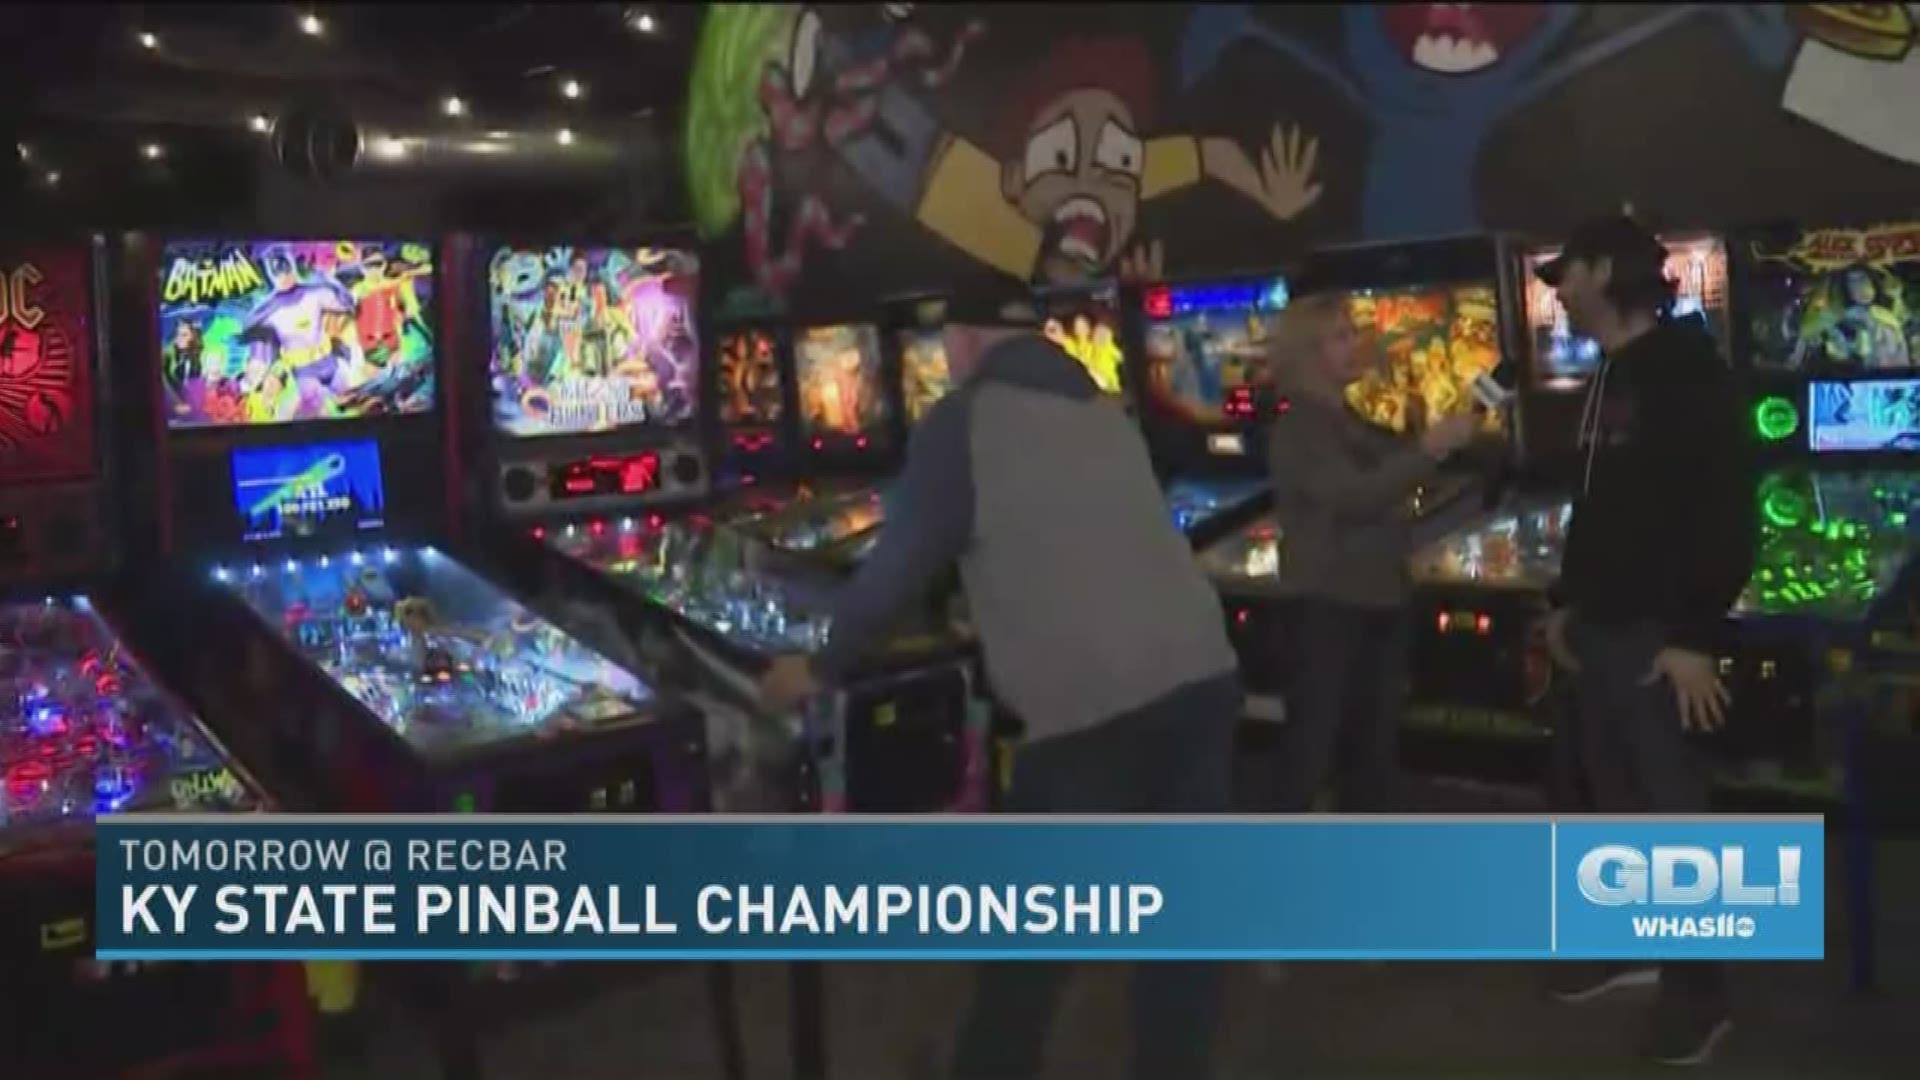 The Kentucky State Pinball Championship is coming to Recbar, which is located at 10301 Taylorsville Road in Louisville, KY.